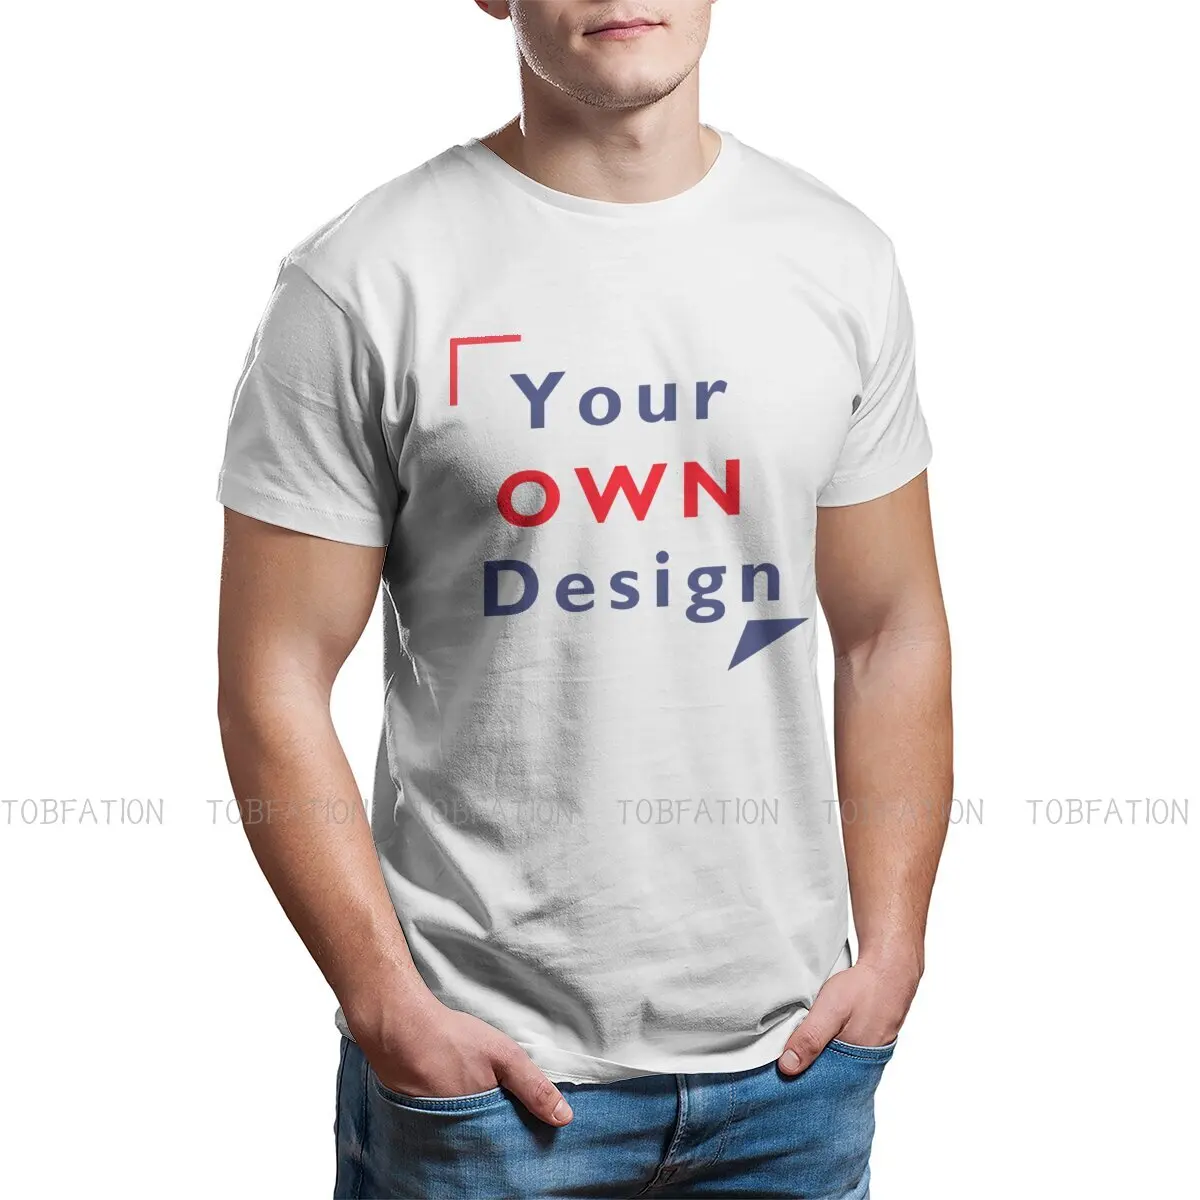 

Your Own Design Double Print TShirt Custom Customize Unique Exclusive Gift Giving Pure T Shirt Men Clothes Individuality